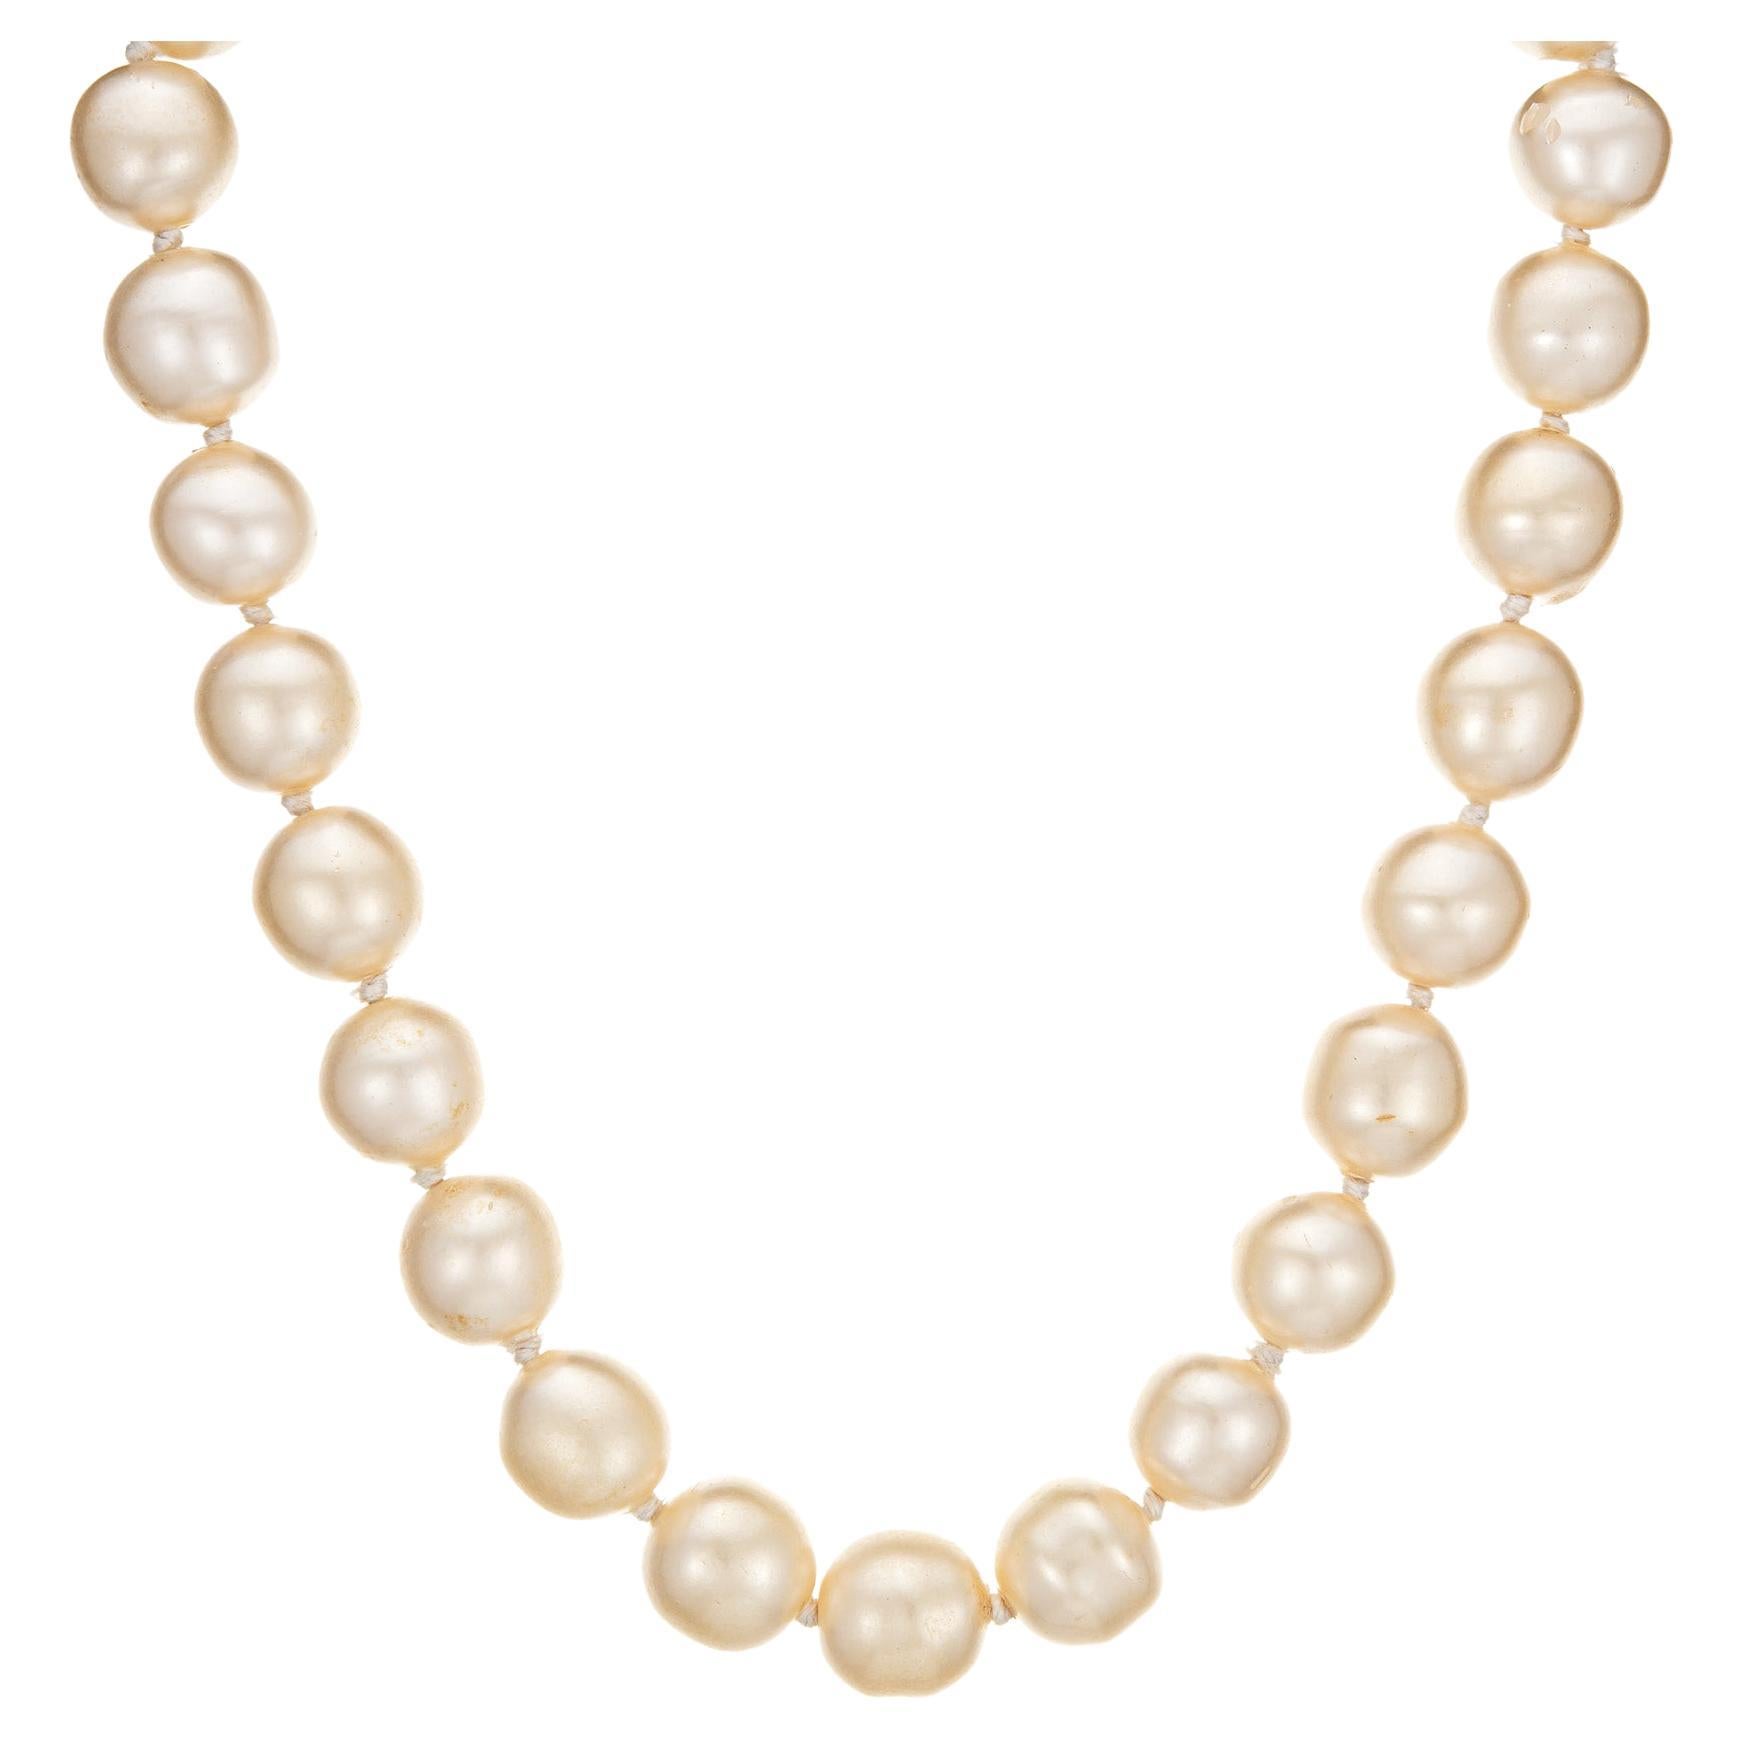 1995 Vintage Chanel Choker Necklace Large 14.5mm Faux Pearls Yellow Gold Tone  For Sale